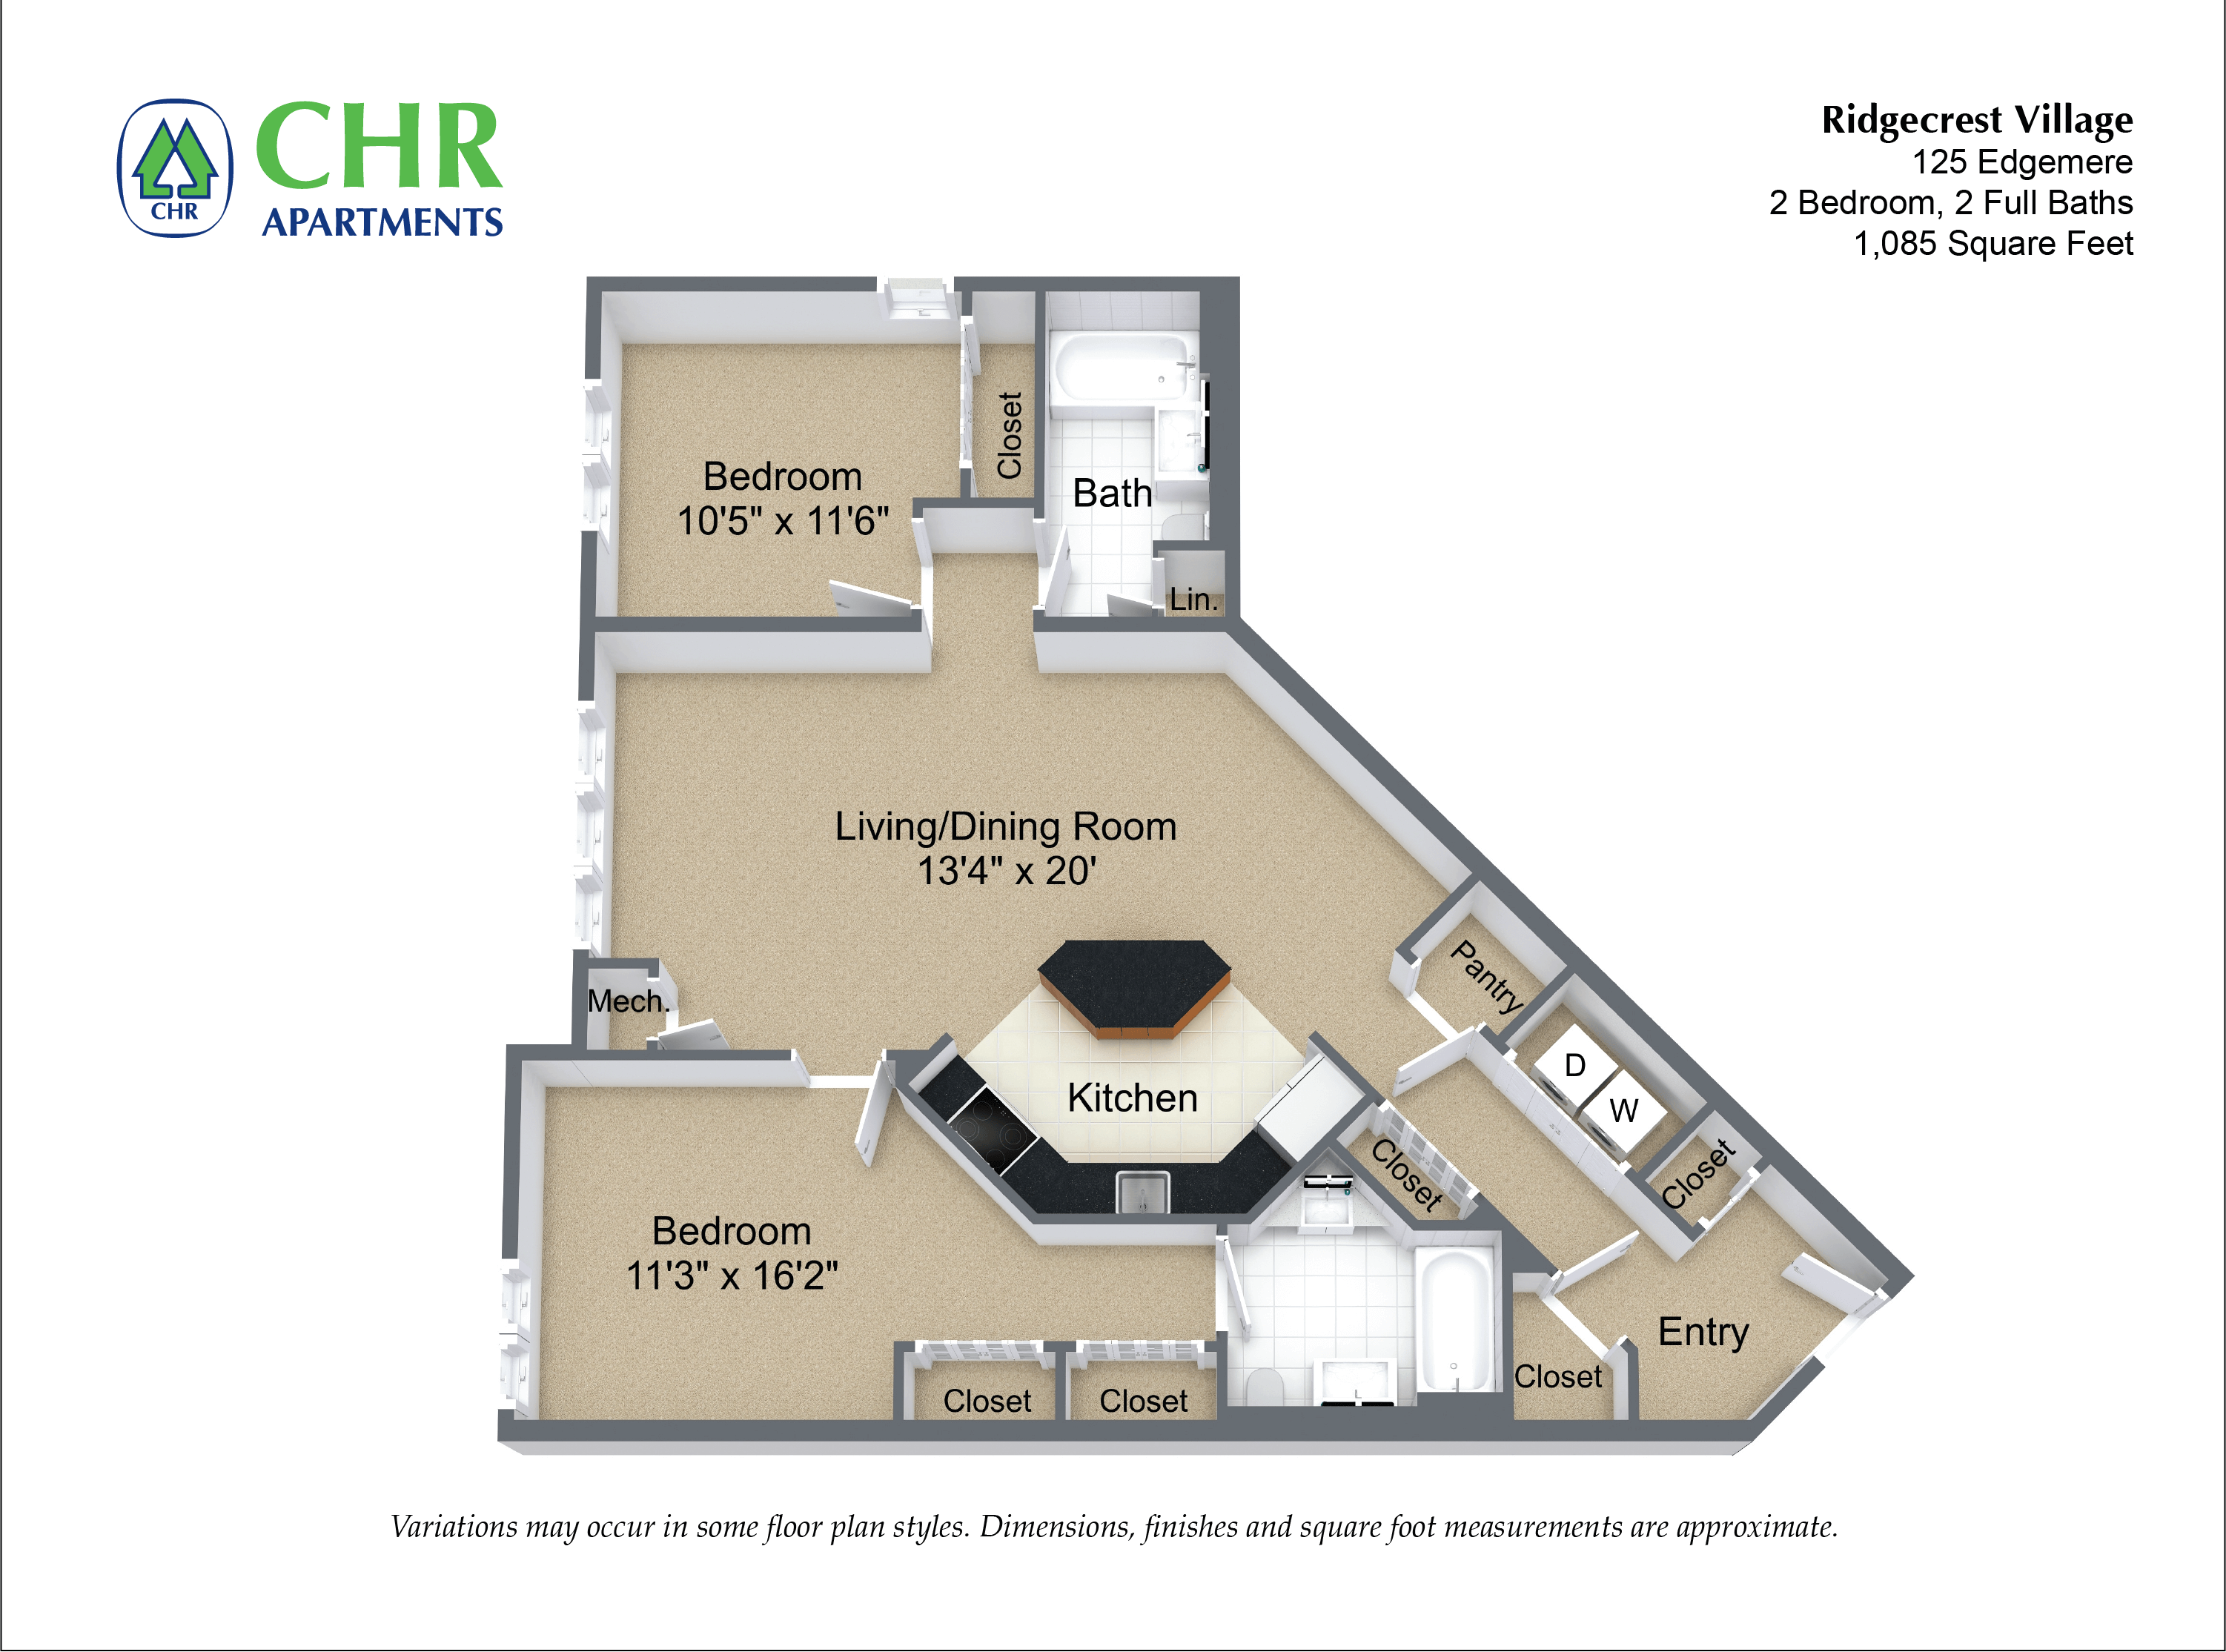 Click to view 2 Bed/2 Bath - Edgemere floor plan gallery